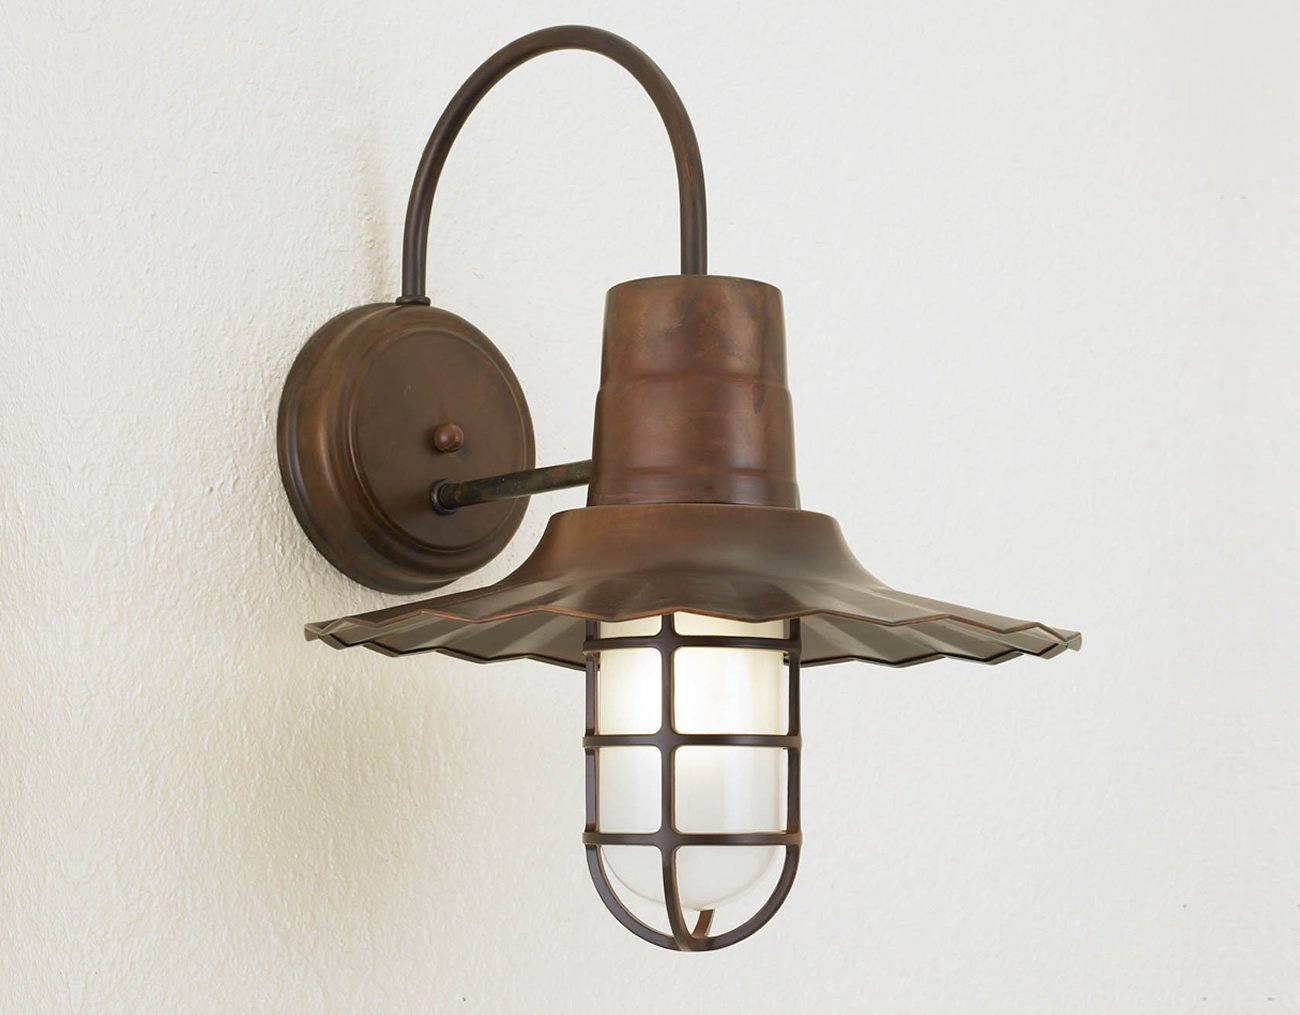 Hi-Lite Radial Shade Sconce - 14" (shown w/ Rosewood finish, cast guard and frosted glass)